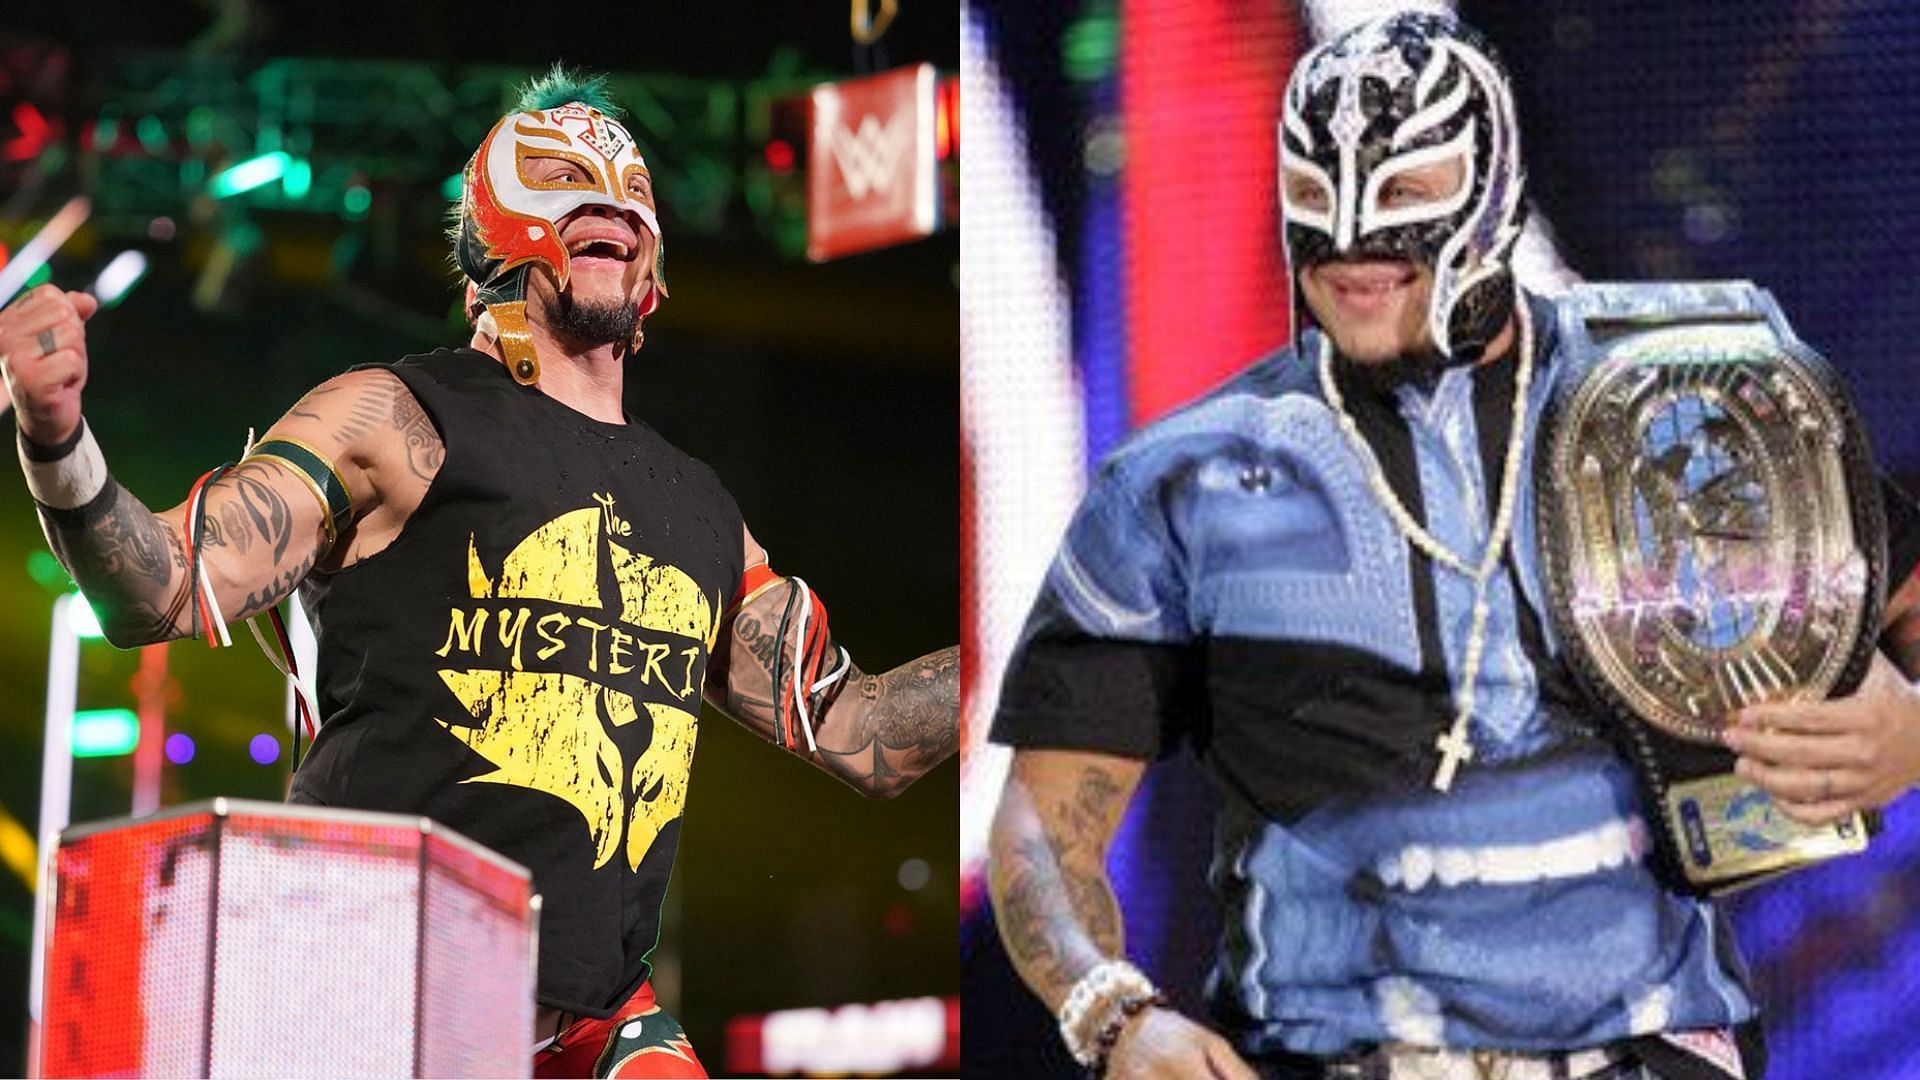 Rey Mysterio is a former Intercontinental Champion